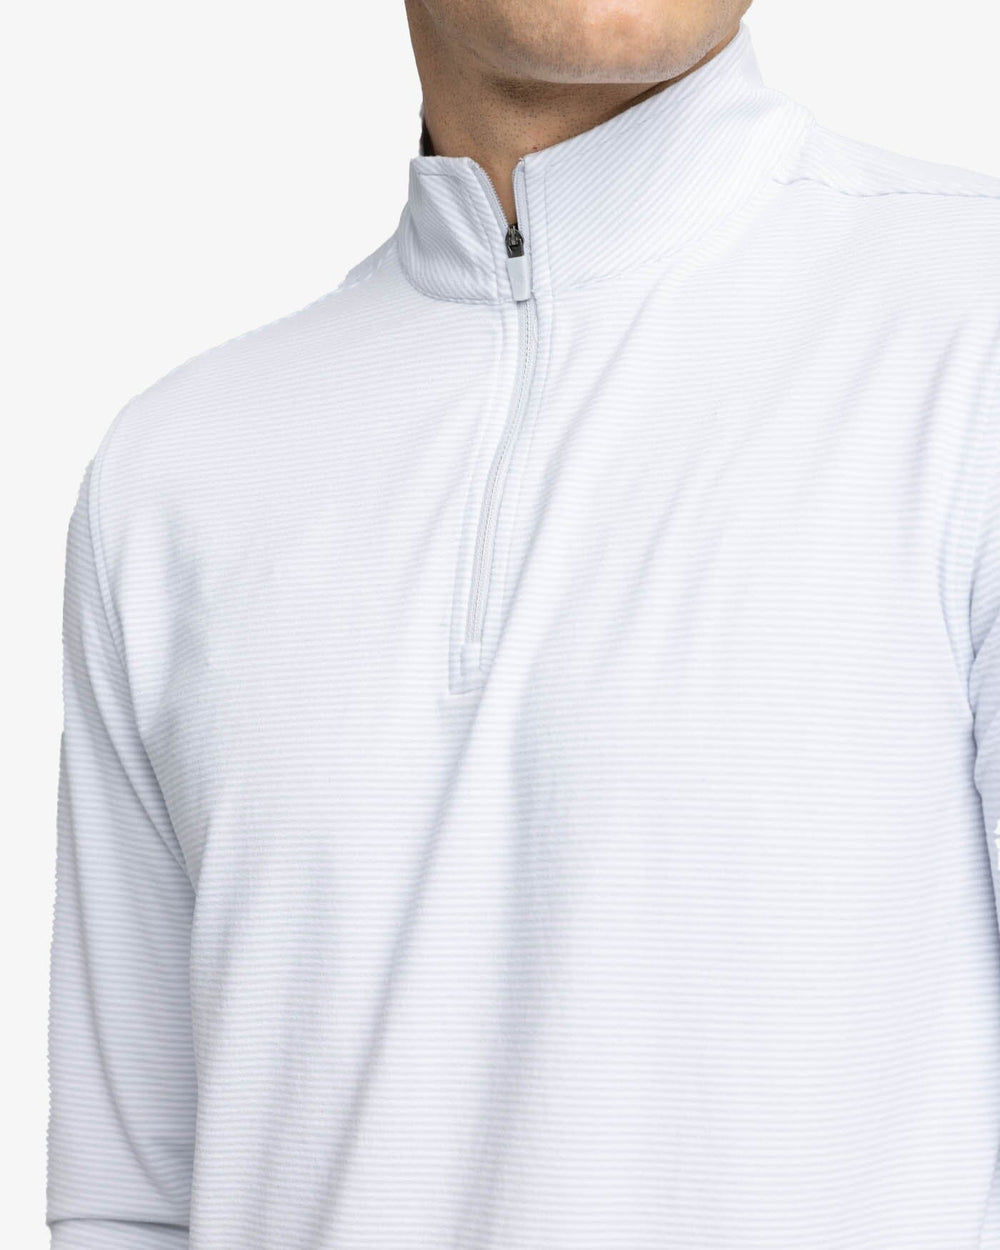 The detail view of the Southern Tide Cruiser Micro-Stripe Heather Quarter Zip by Southern Tide - Heather Slate Grey